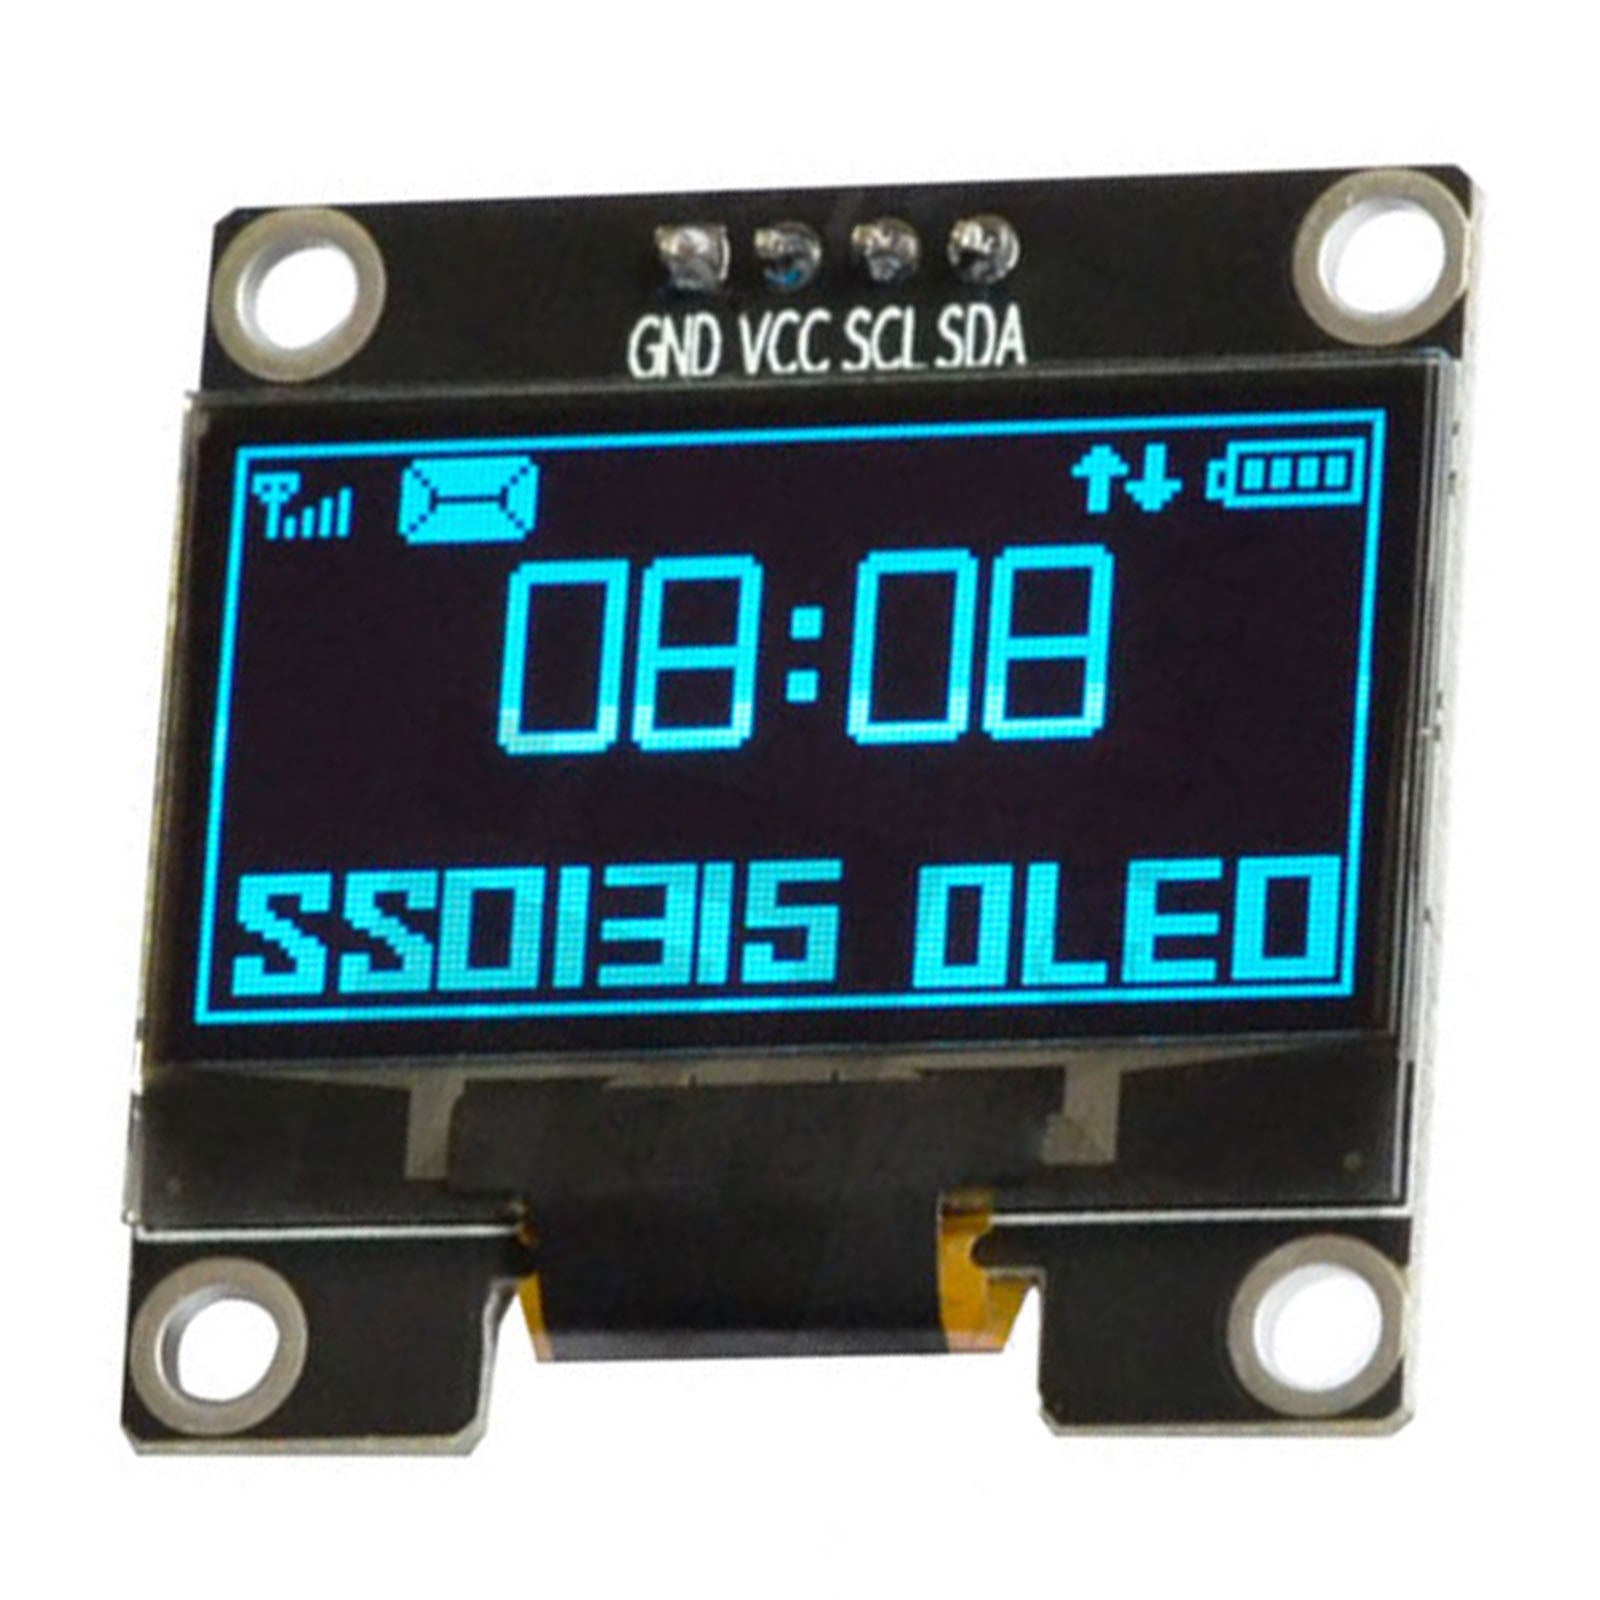 1.29-inch OLED Blue Graphic Display Module with 128x64 resolution